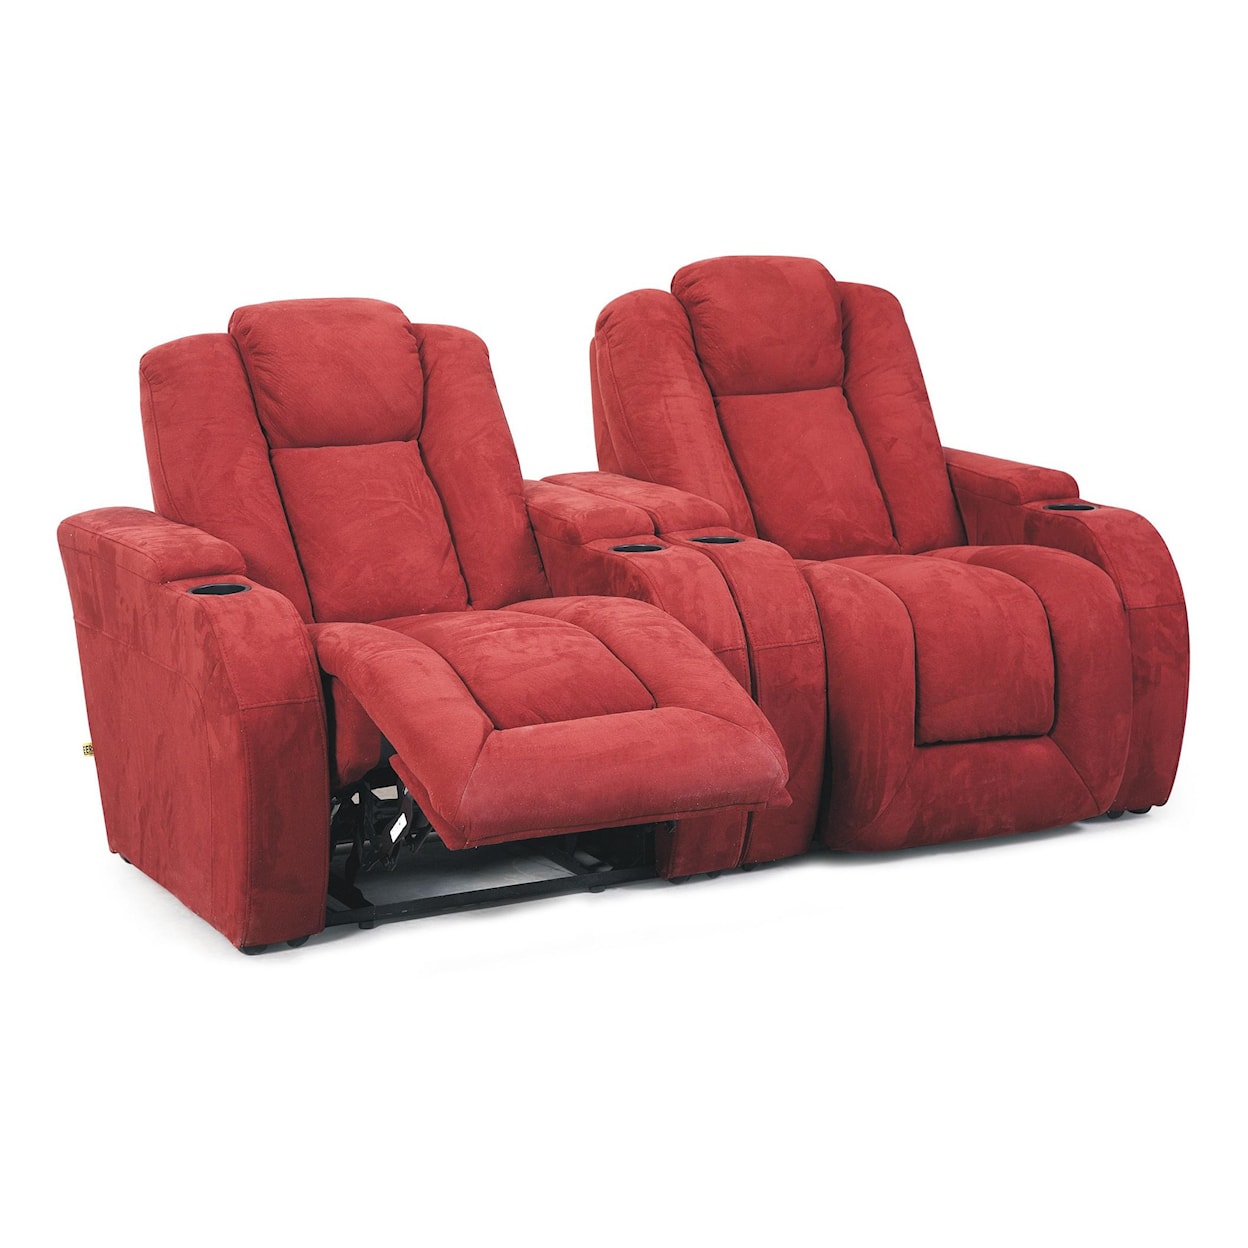 VFM Signature 8511 Chaise Pad Recliner Sectional